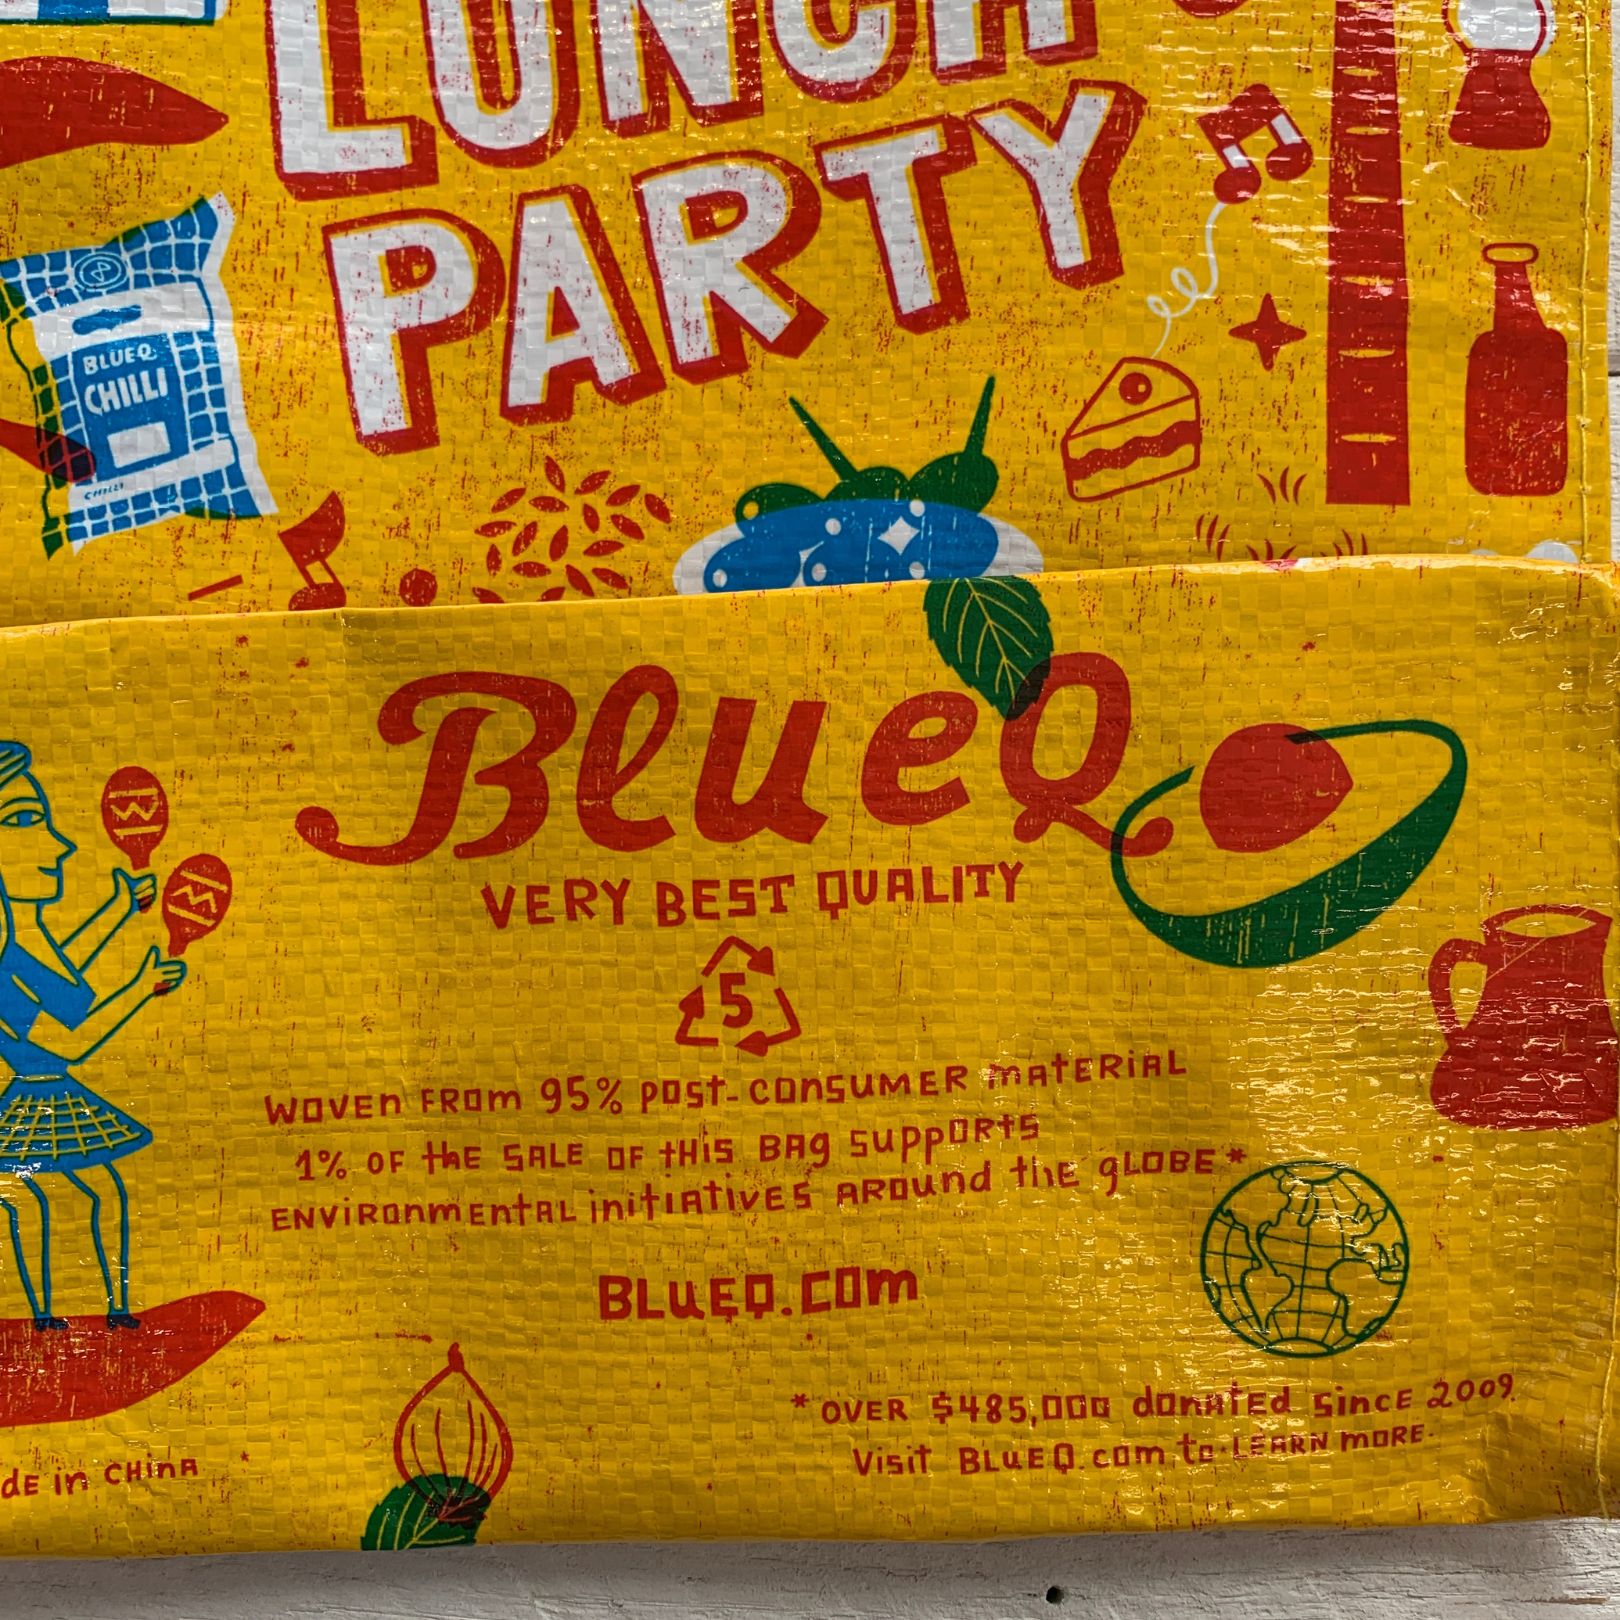 Lunch Party Handy Tote Bag | Reusable Lunch Gift Bag | 10" x 8.5"